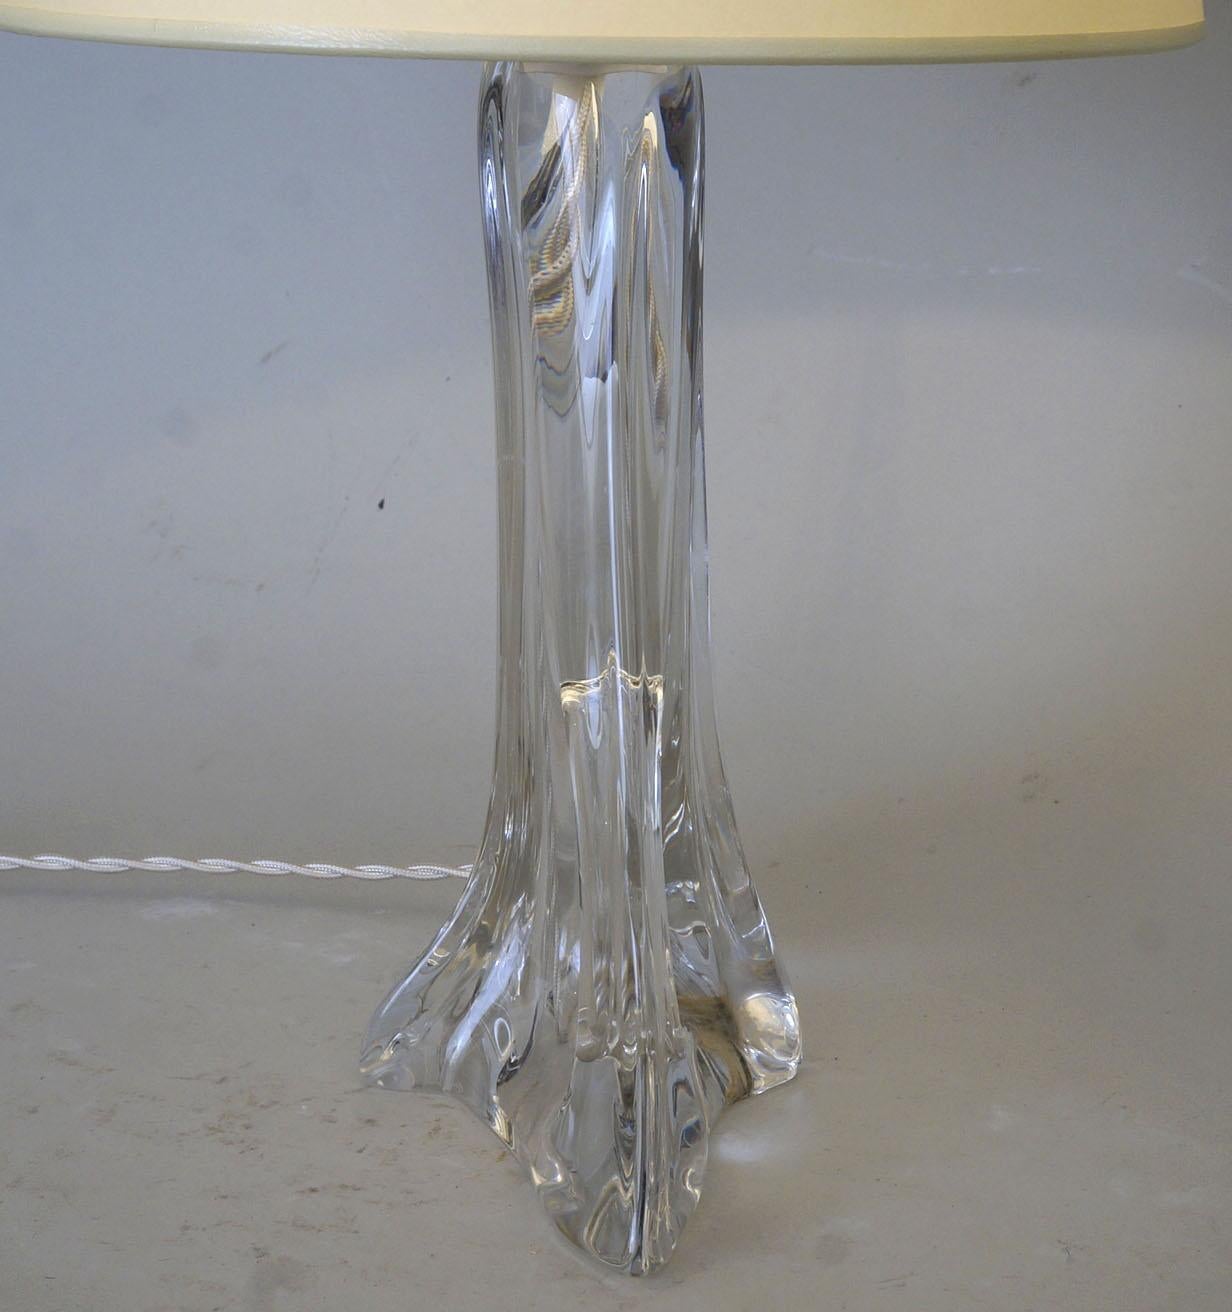 Crystal lamp by Daum signed on the base Daum France.
Custom-made fabric lampshades.
Rewired with twisted silk cord.
US standard plug on request.

Measures: Ceramic 25 cm - 9.9 in.
Height with lampshade 44 cm - 17.3 in.